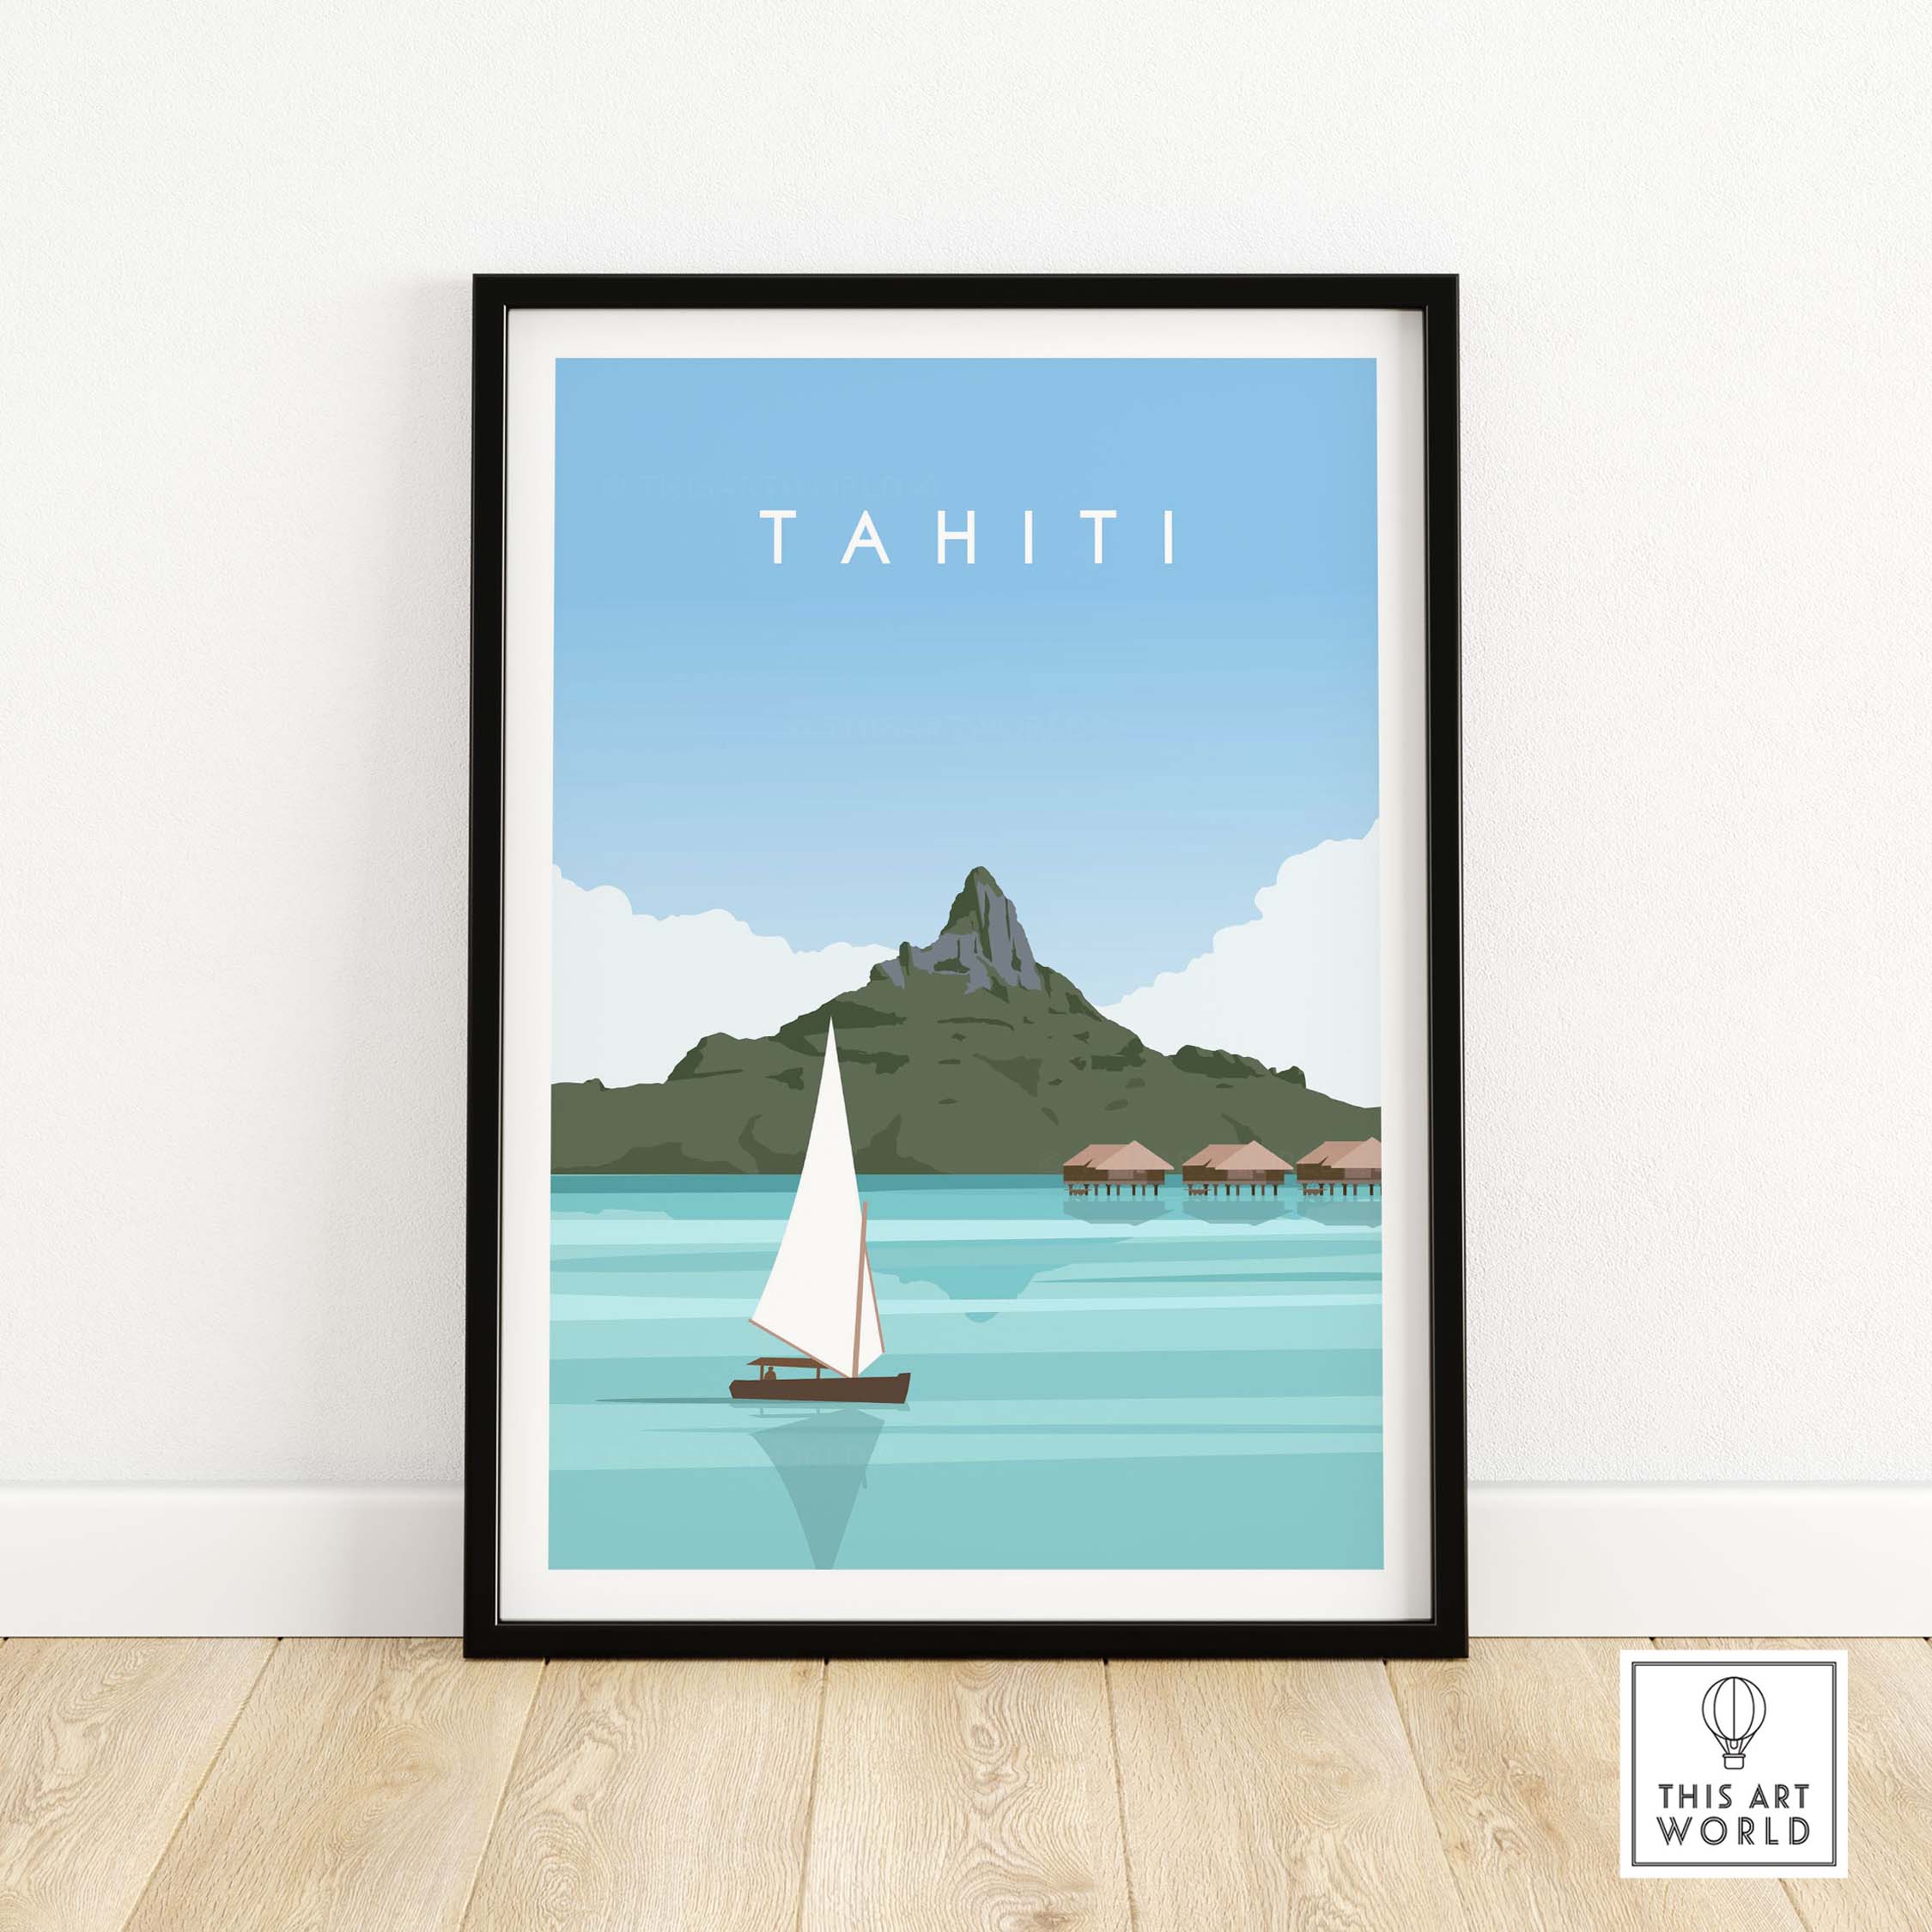 Shop Travel Posters | Art Art Wall and Wanderlust World This